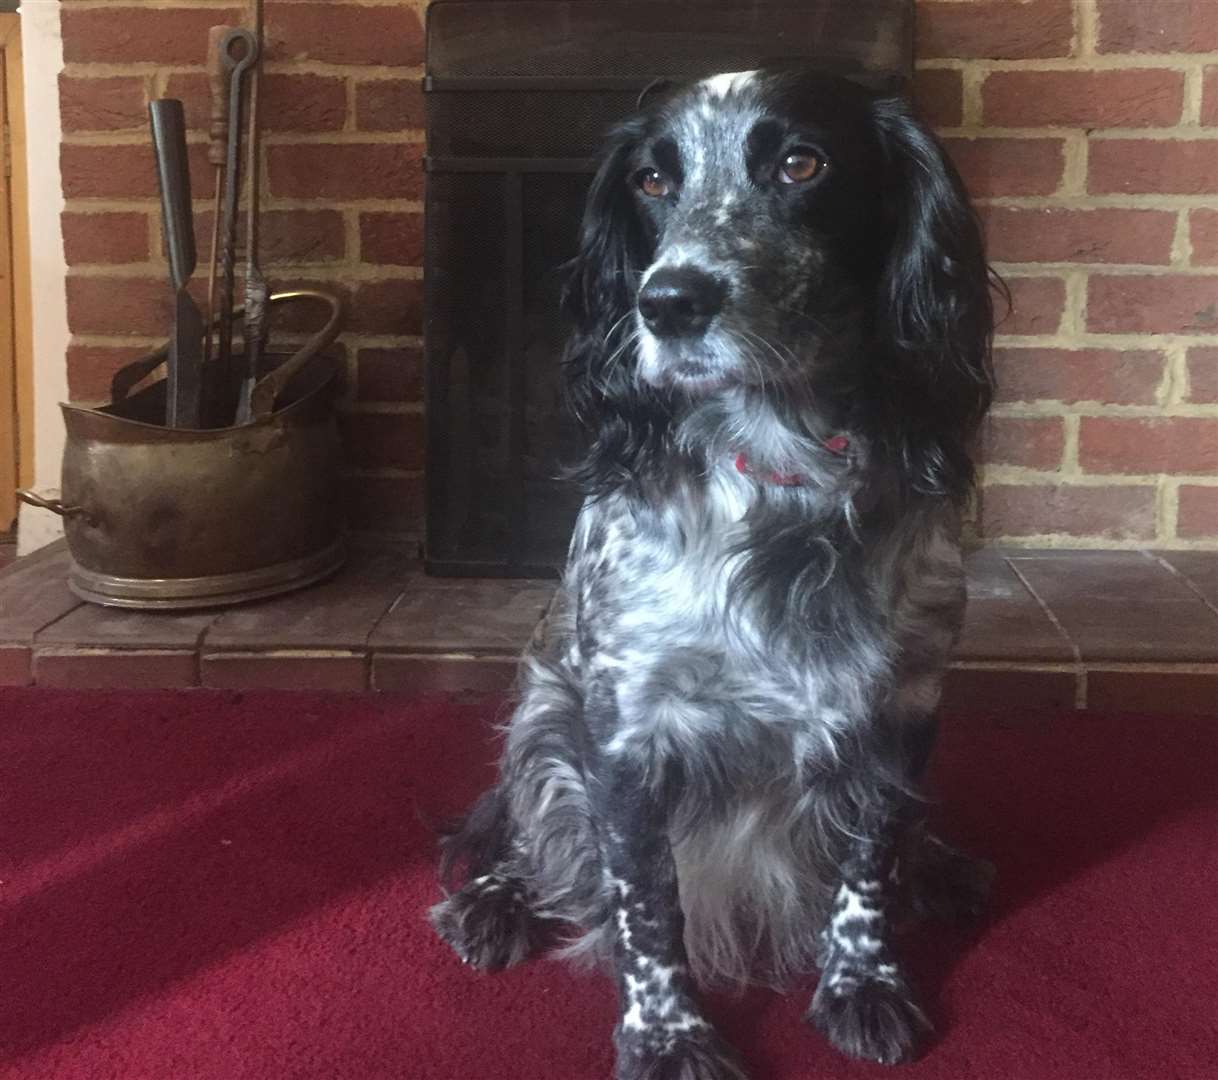 Molly the black and white spaniel is still missing